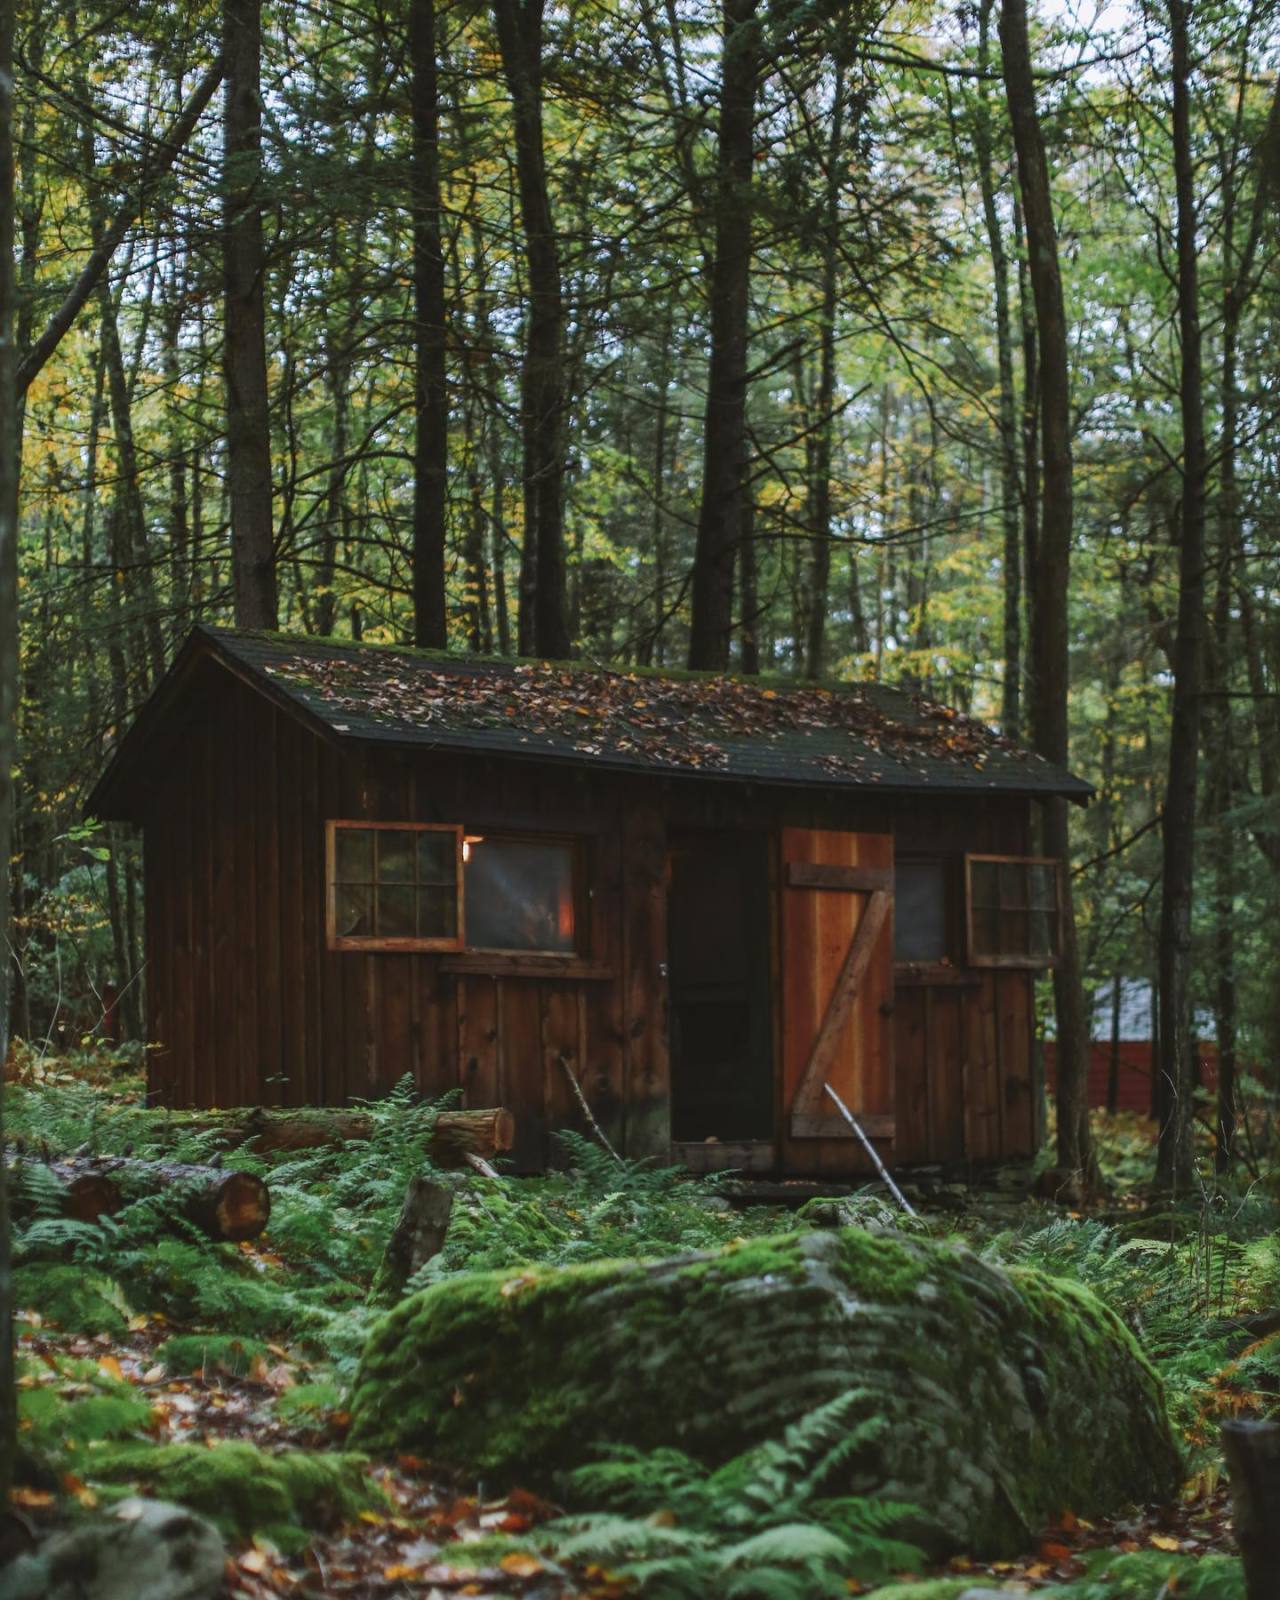 The Rustic Writer’s Cabin and Le Petite Cabin @smokeybellescatskills in Narrowsburg, New York.  Photographs by @pbcrosby More photos on @cabinporn.